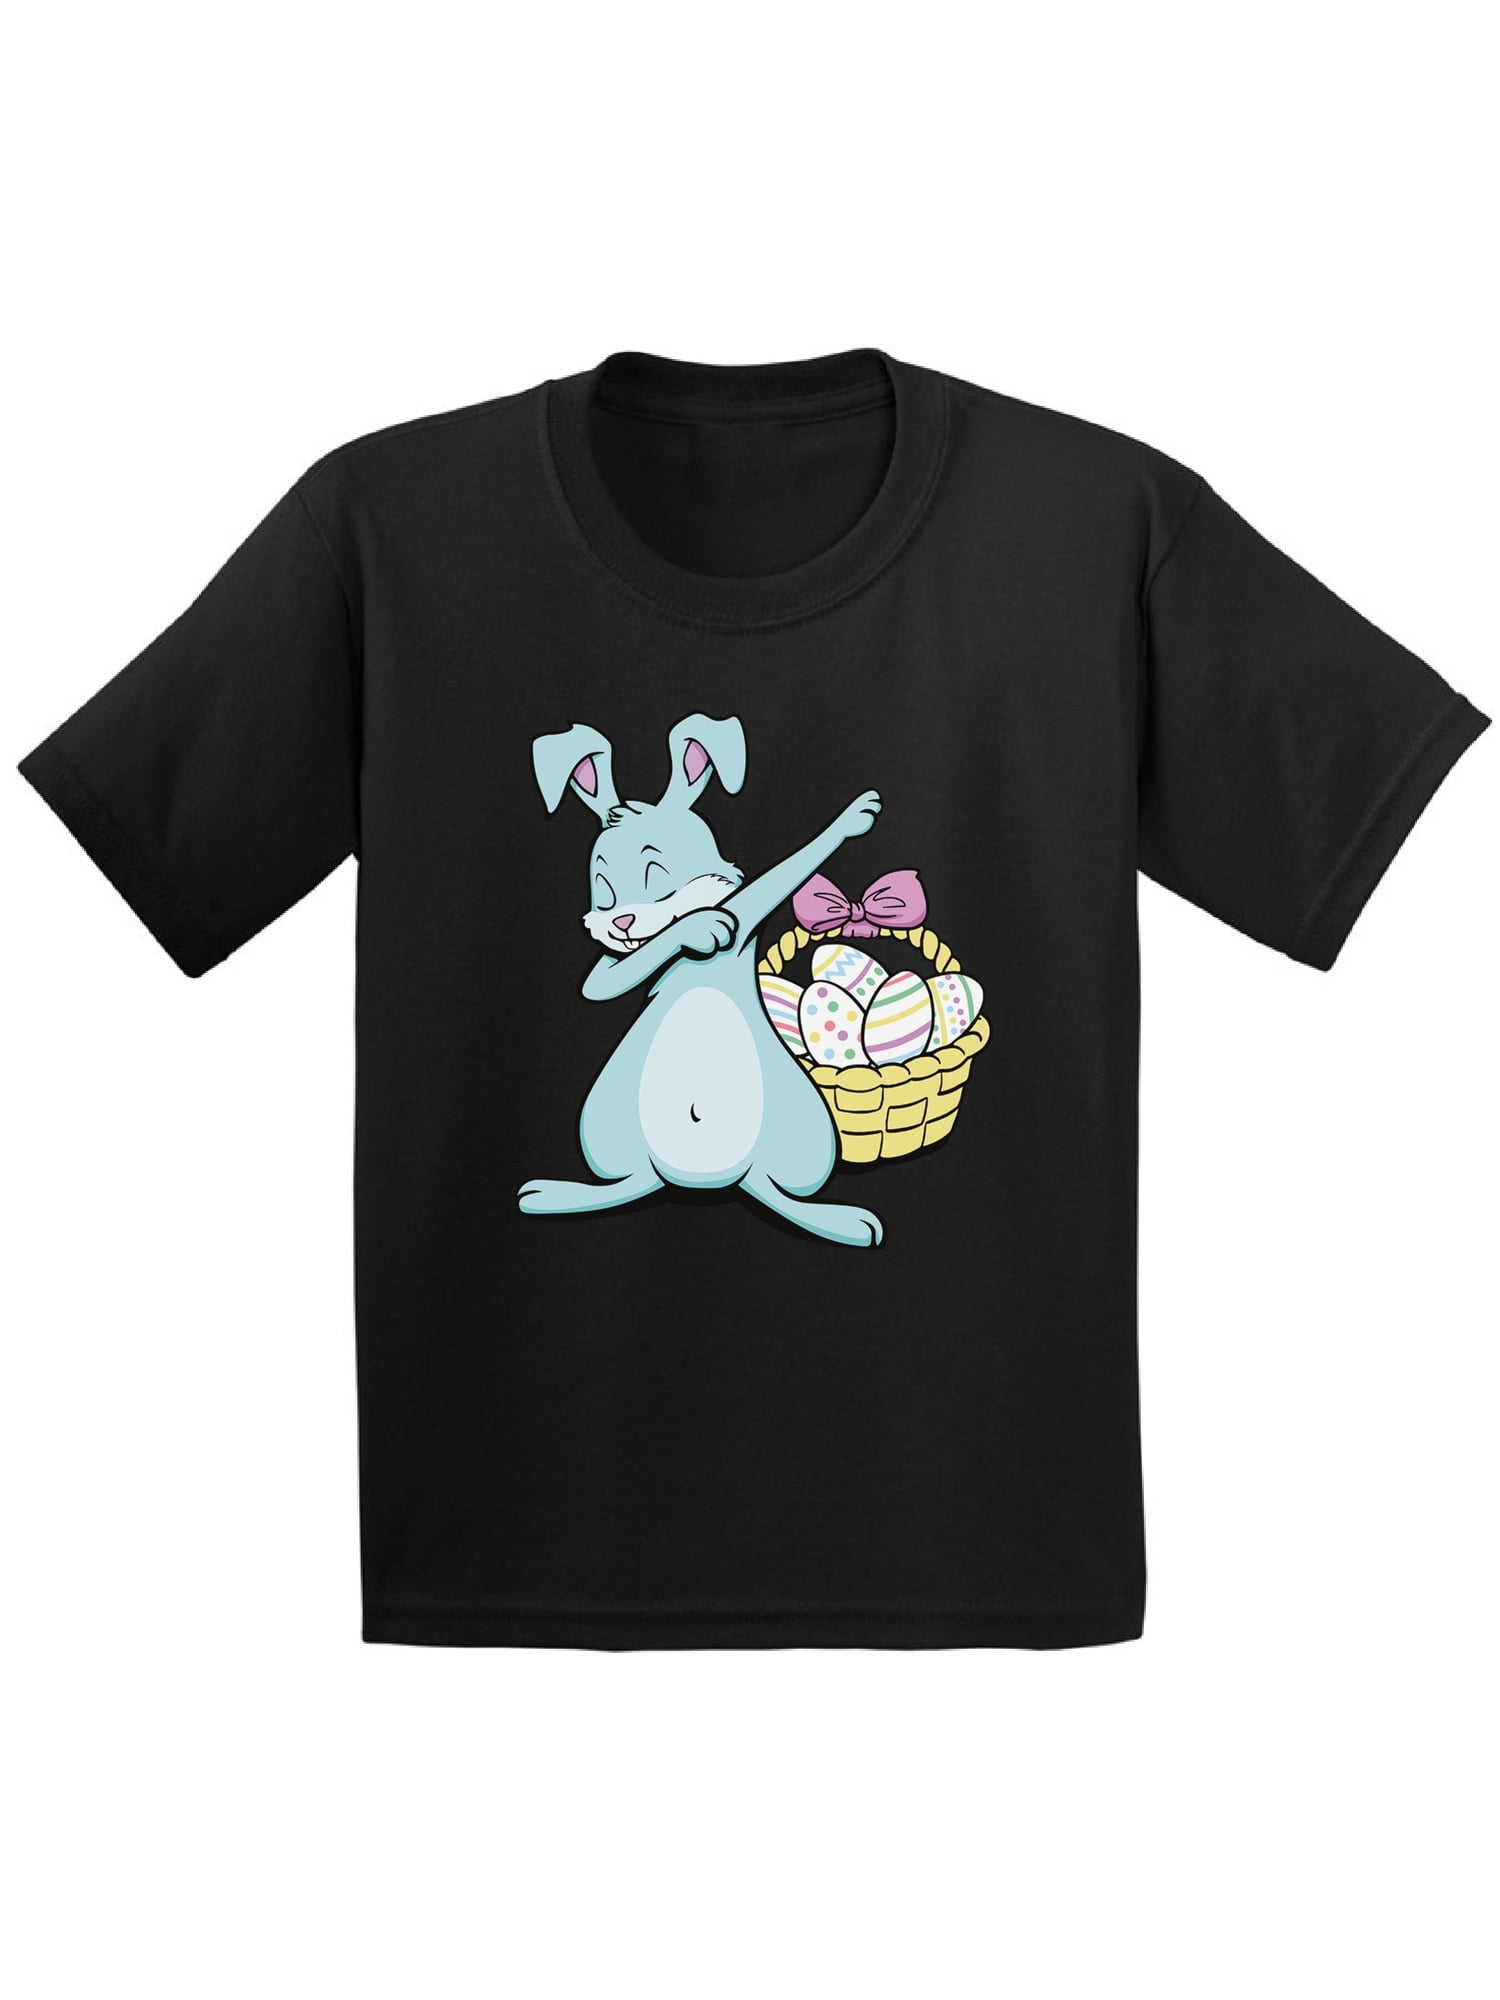 Personalised Easter Bunny Ears T-Shirt,T-Shirt For Boys,Boys Easter Gift,Rabbit 